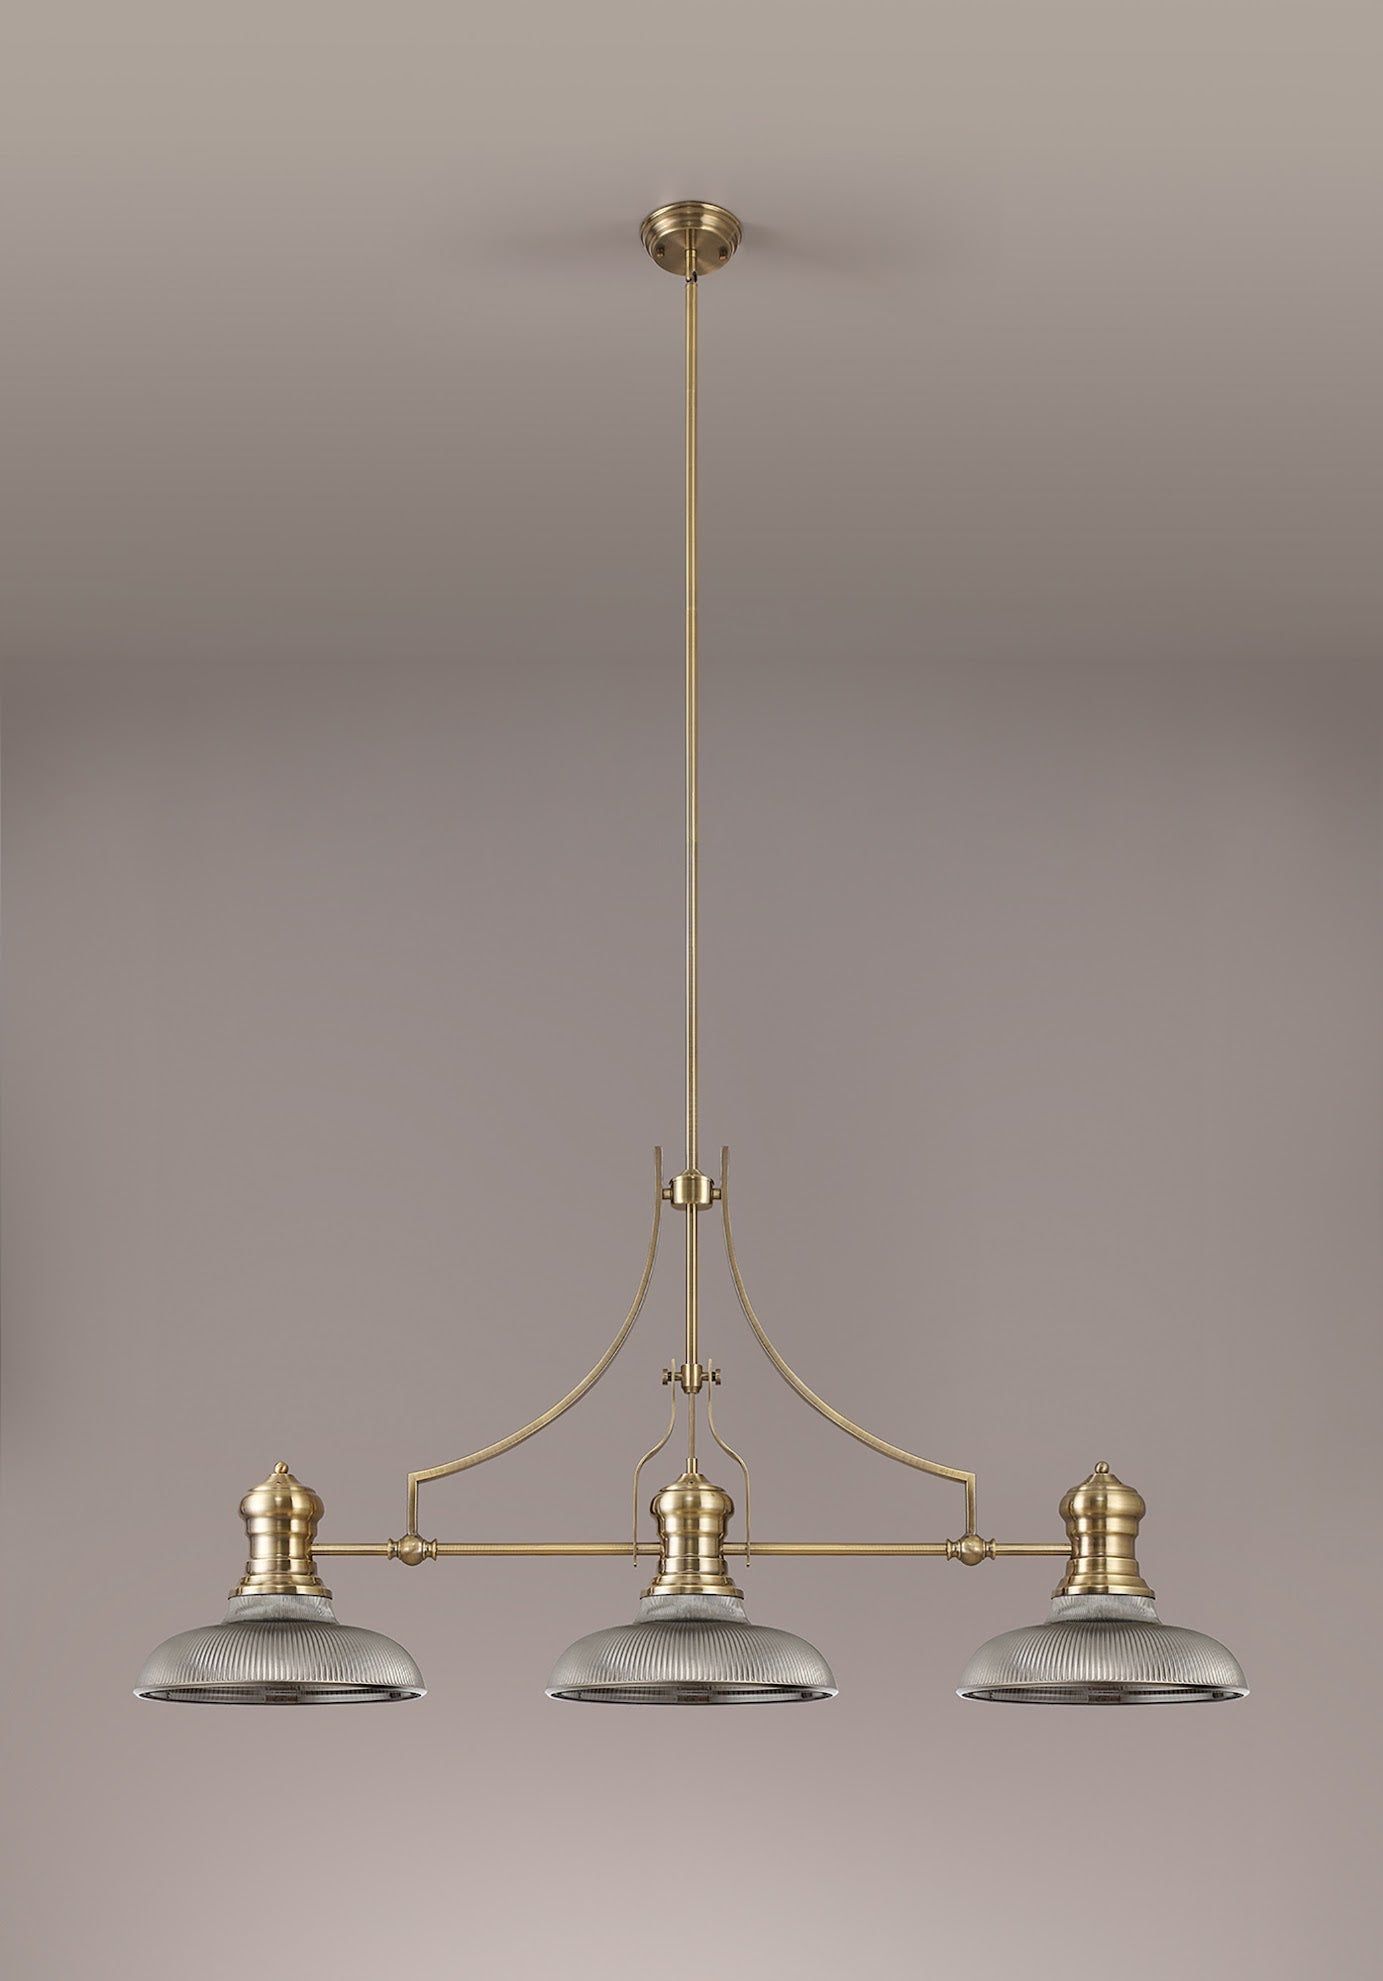 Savannah 3 Light Linear Pendant E27 With 30cm Round Glass Shade, Antique Brass, Smoked